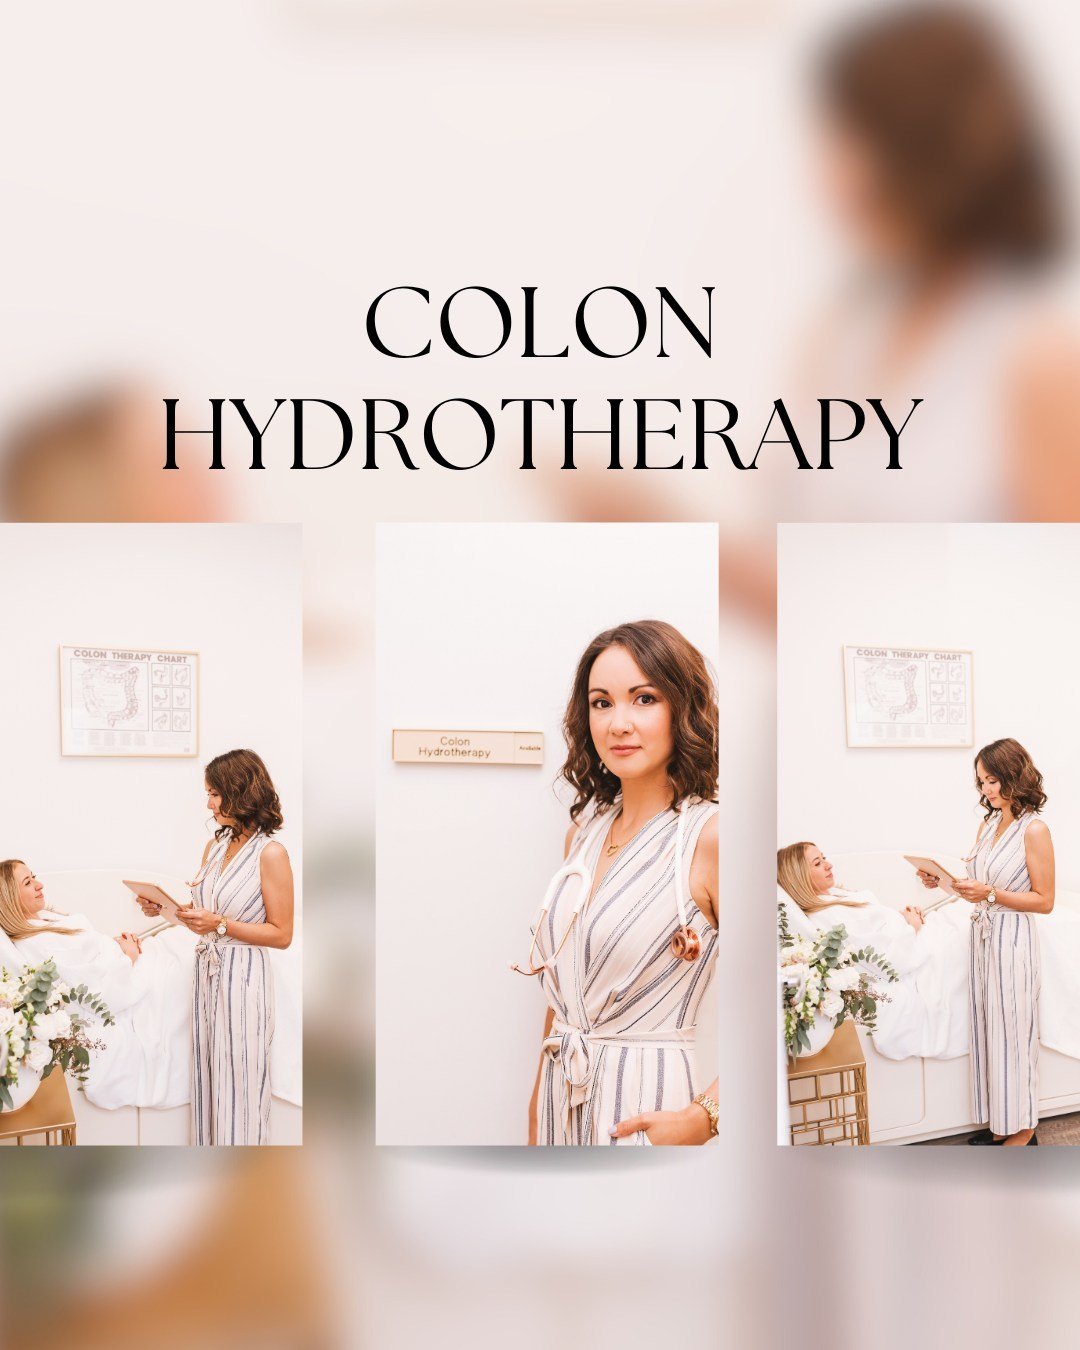 We know you've curious &amp; wondering if you'll benefit from colon hydrotherapy 🤔⁠
⁠
If you have:⁠
🙃 Trouble with sluggish bowels⁠
😖 Not having bowel movements everyday⁠
😩 Feeling bloated and distended all the time⁠
⁠
Then colon hydrotherapy cou